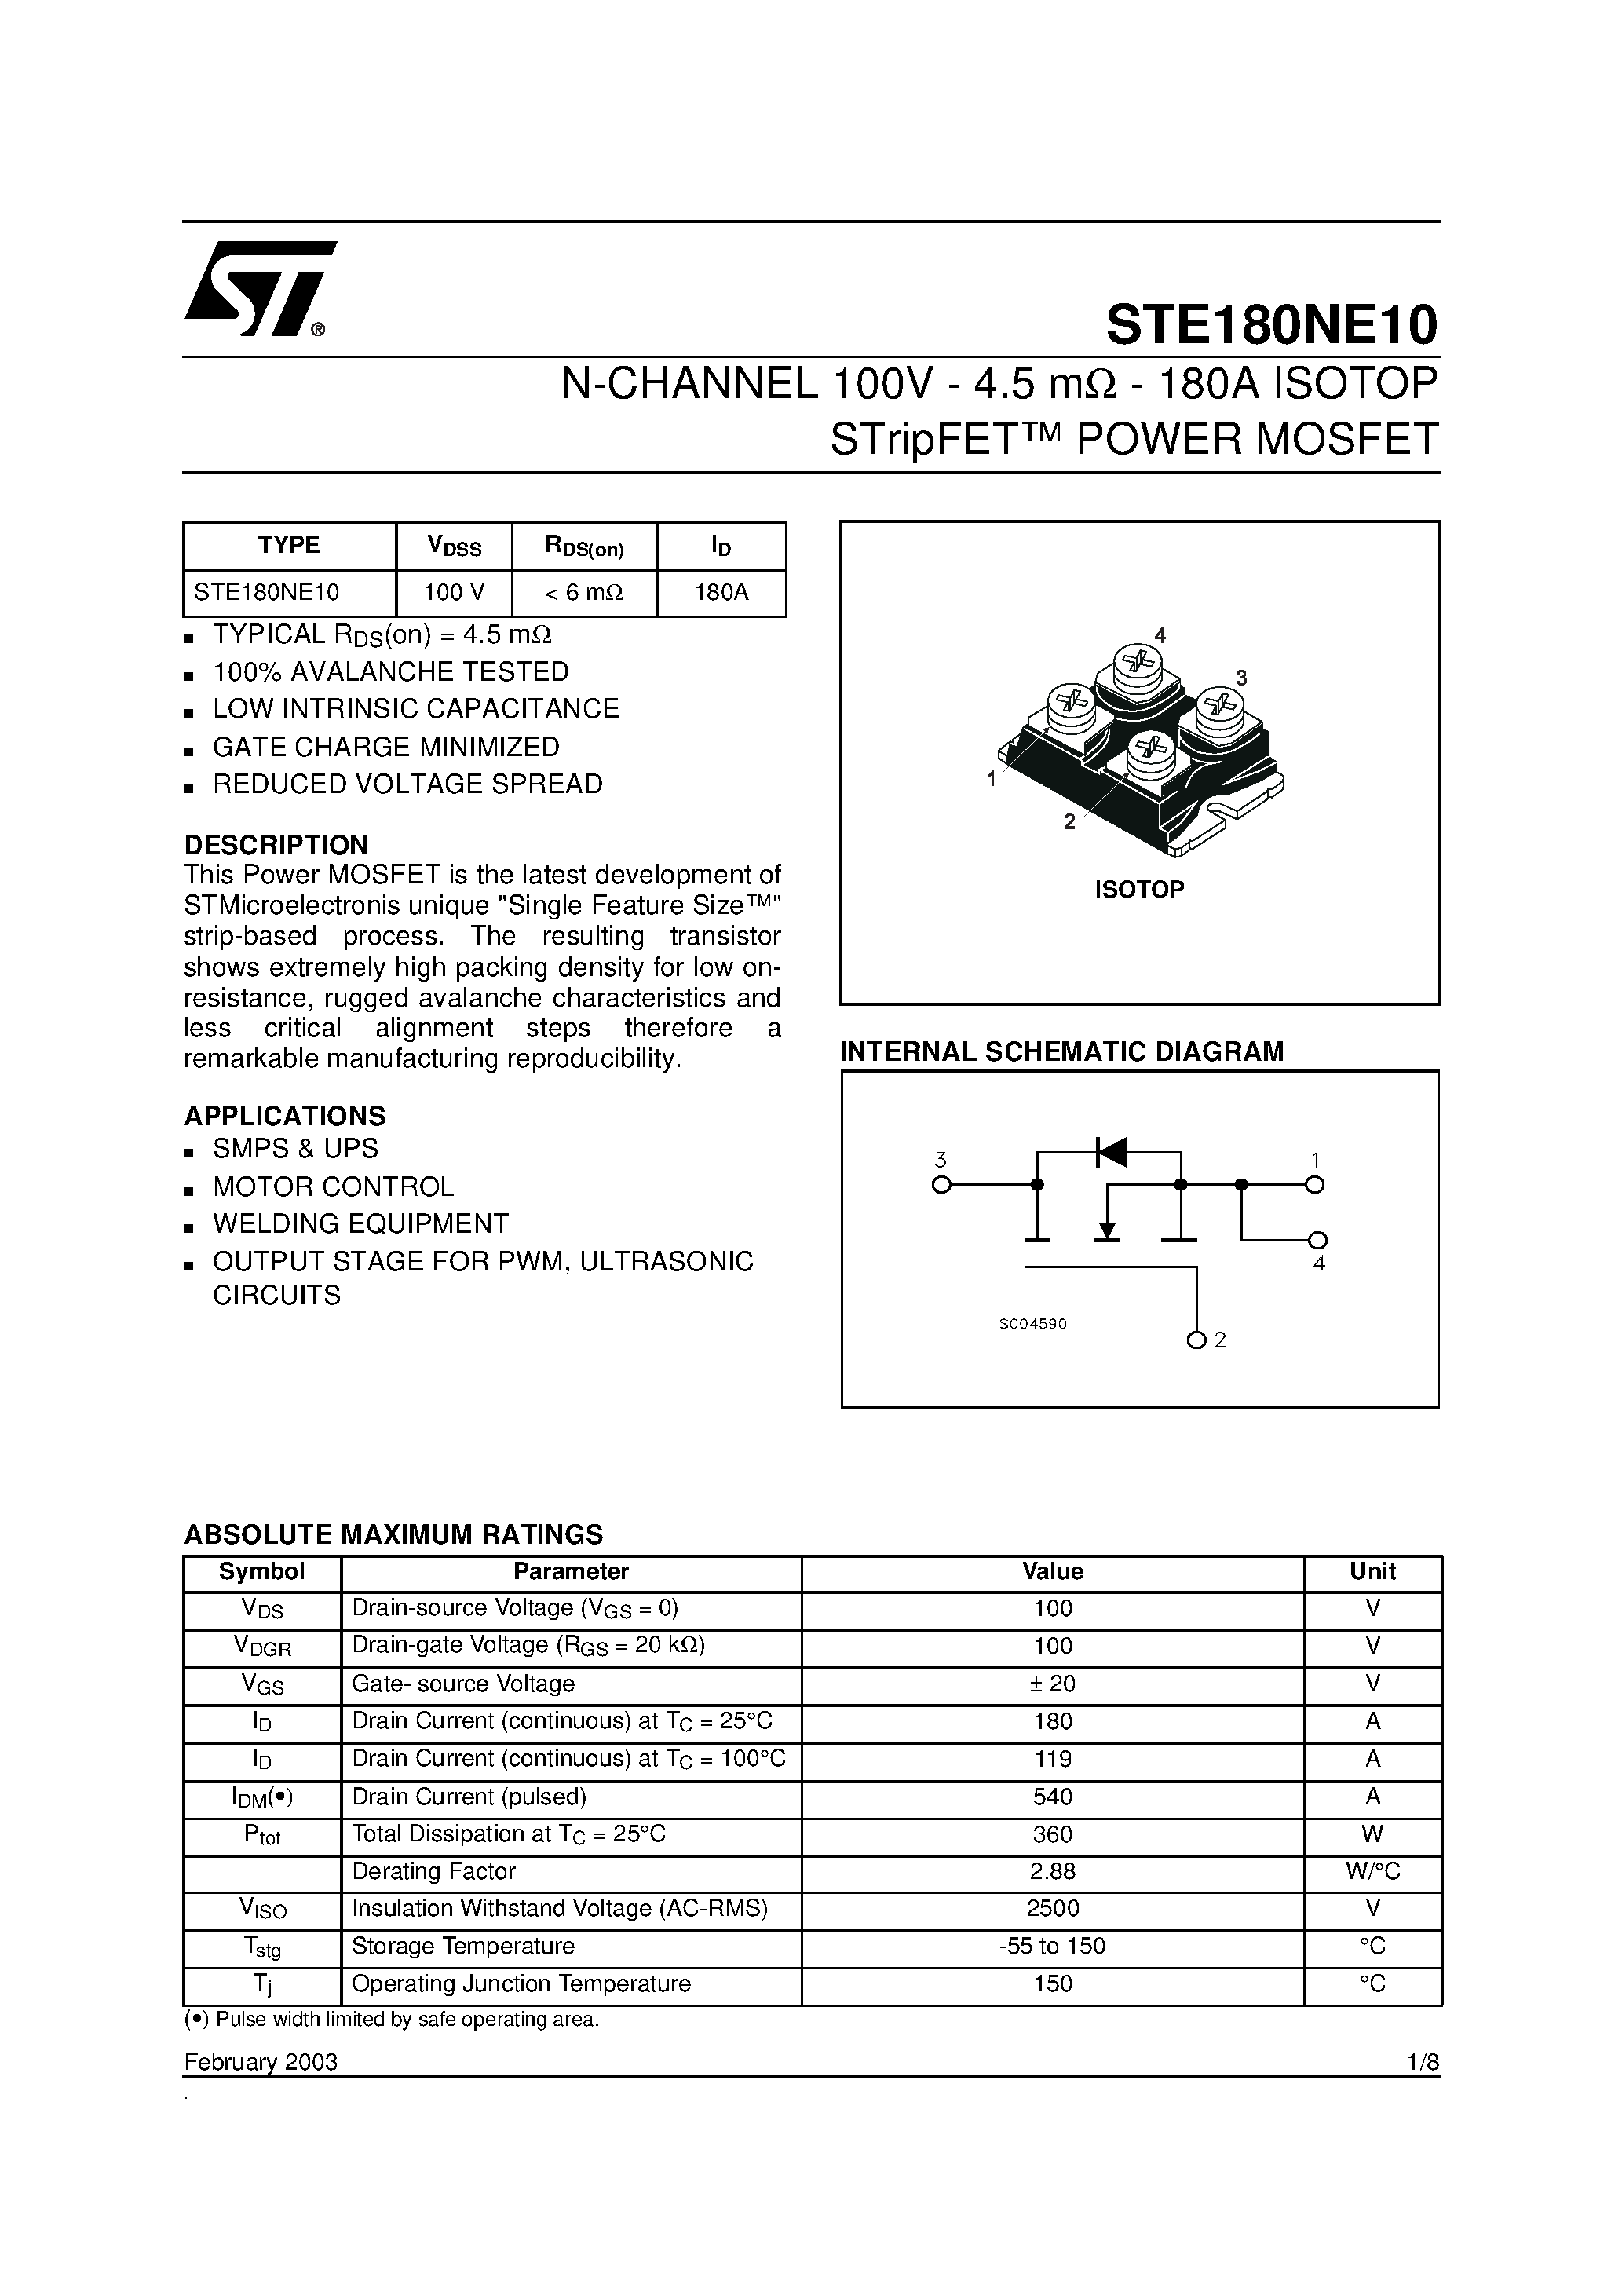 Datasheet STE180NE10 - N-CHANNEL 100V - 4.5 mohm - 180A ISOTOP STripFET POWER MOSFET page 1